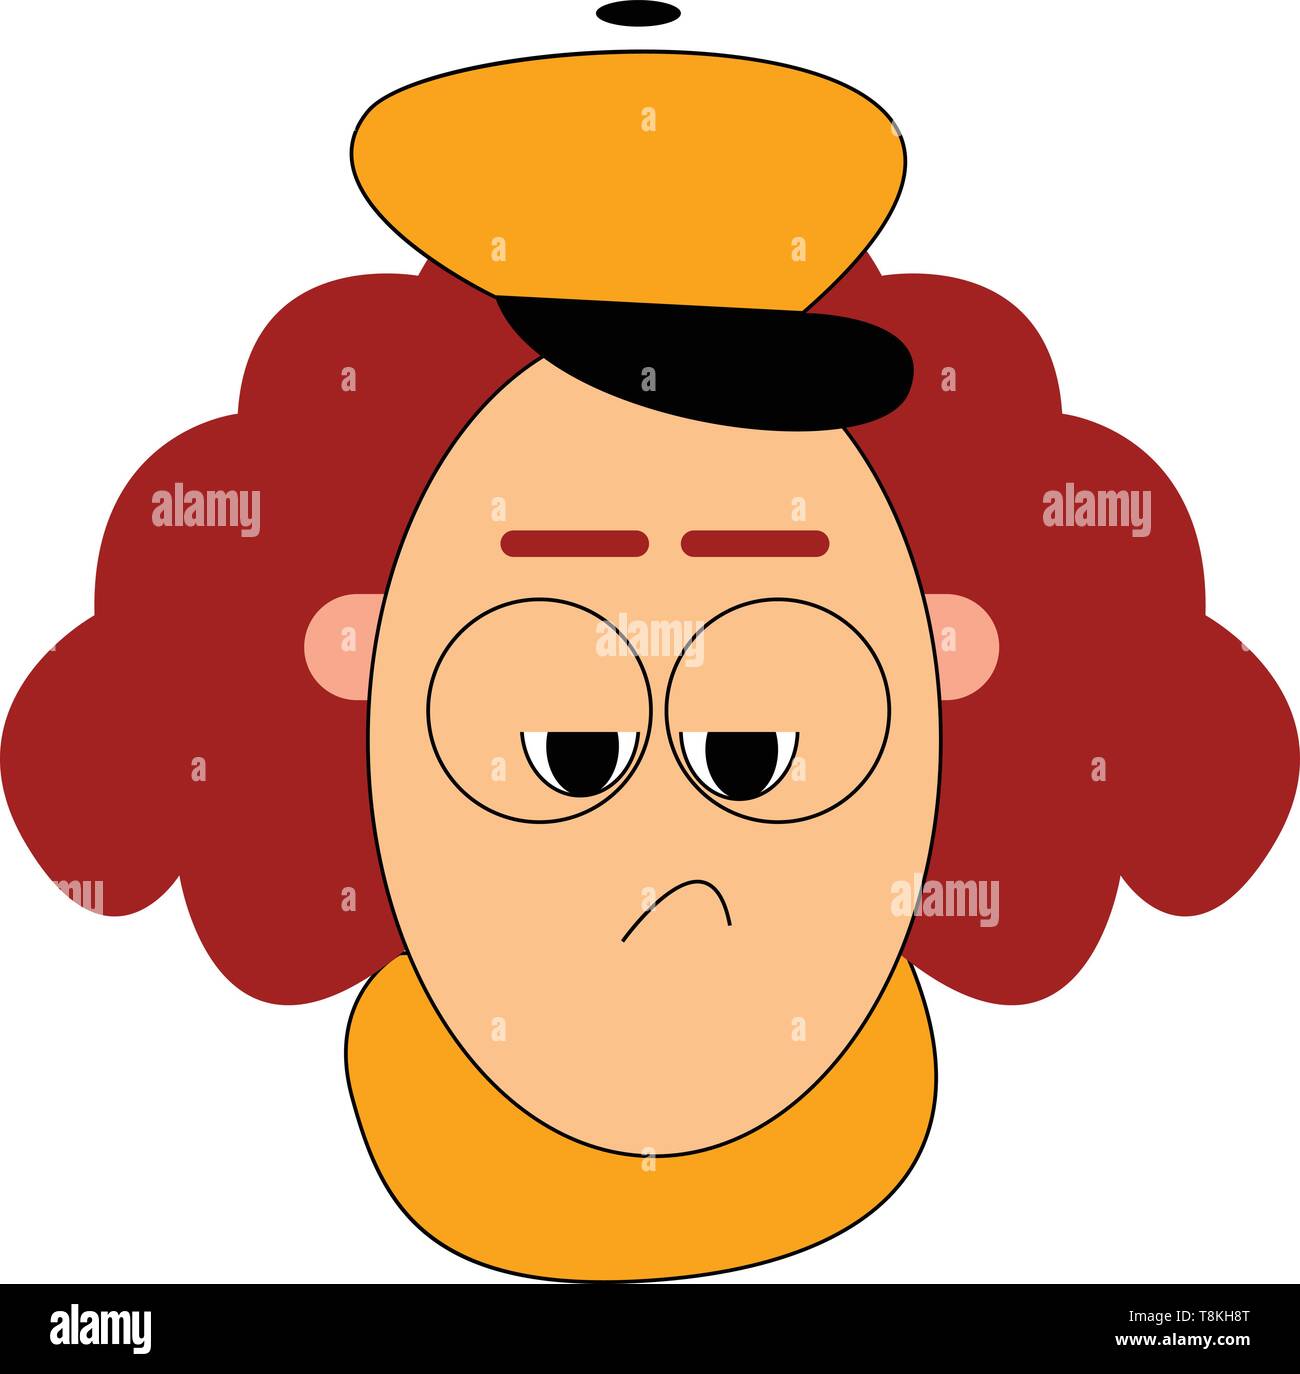 A yellow scarf worn by a sad lady wearing a yellow cap also, vector, color drawing or illustration. Stock Vector